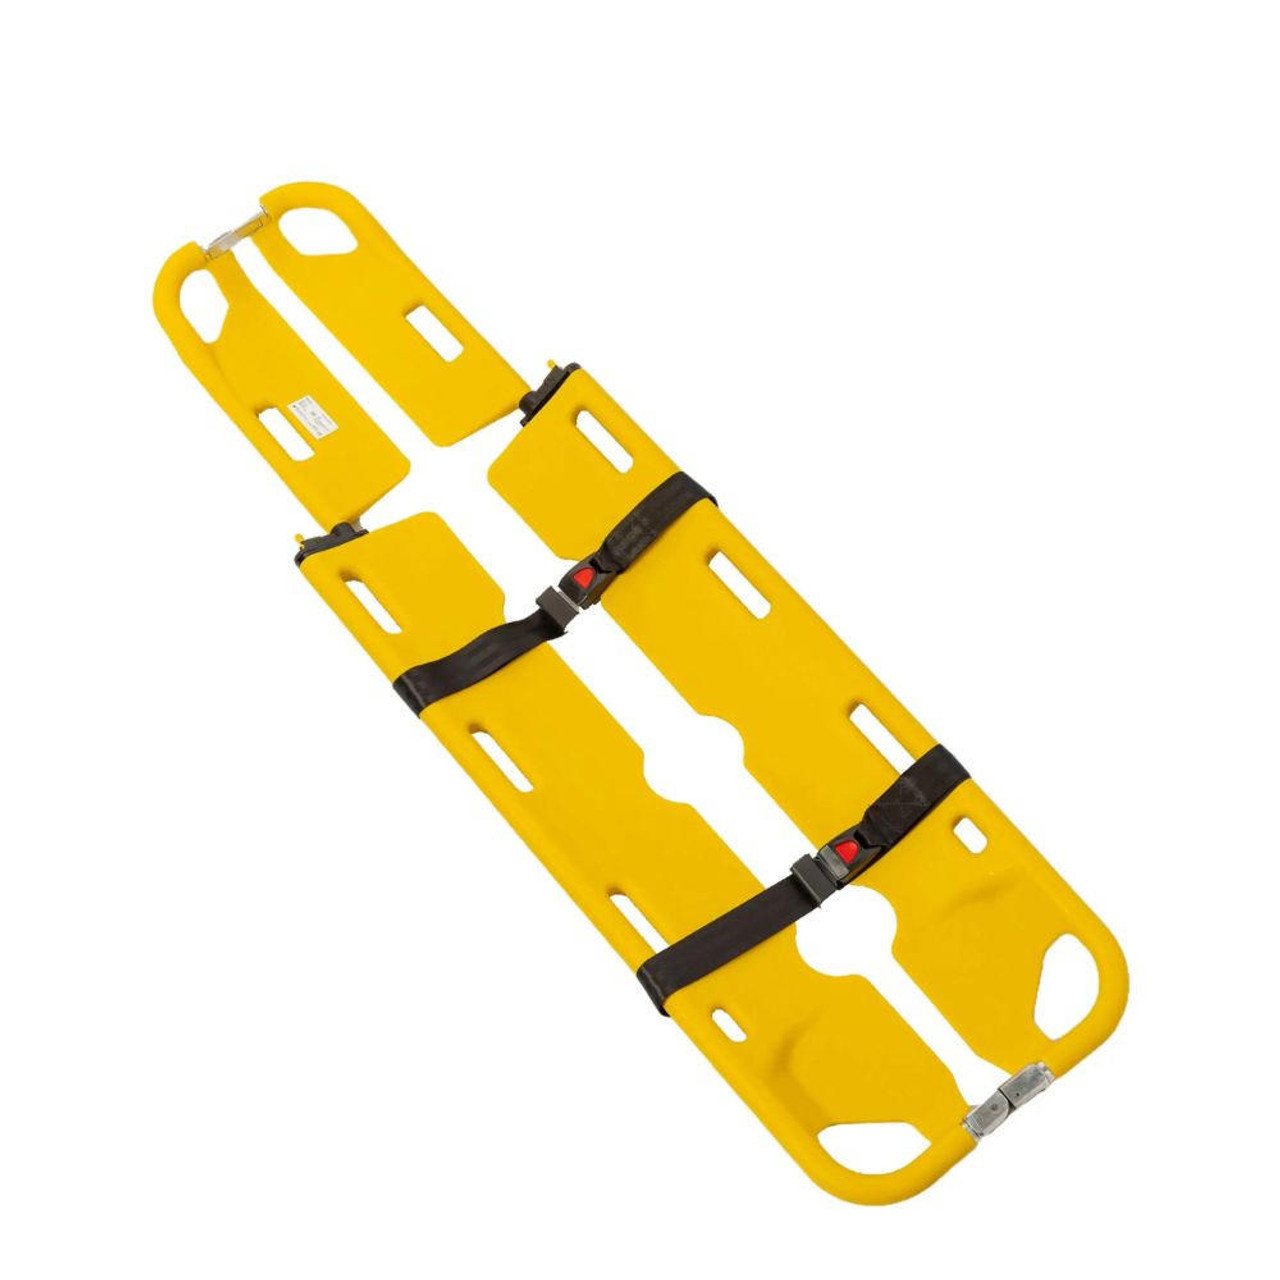 FAQ4579 Scoop Type Stretcher Yellow Two Part for Easy Compact Storage  Zafety 